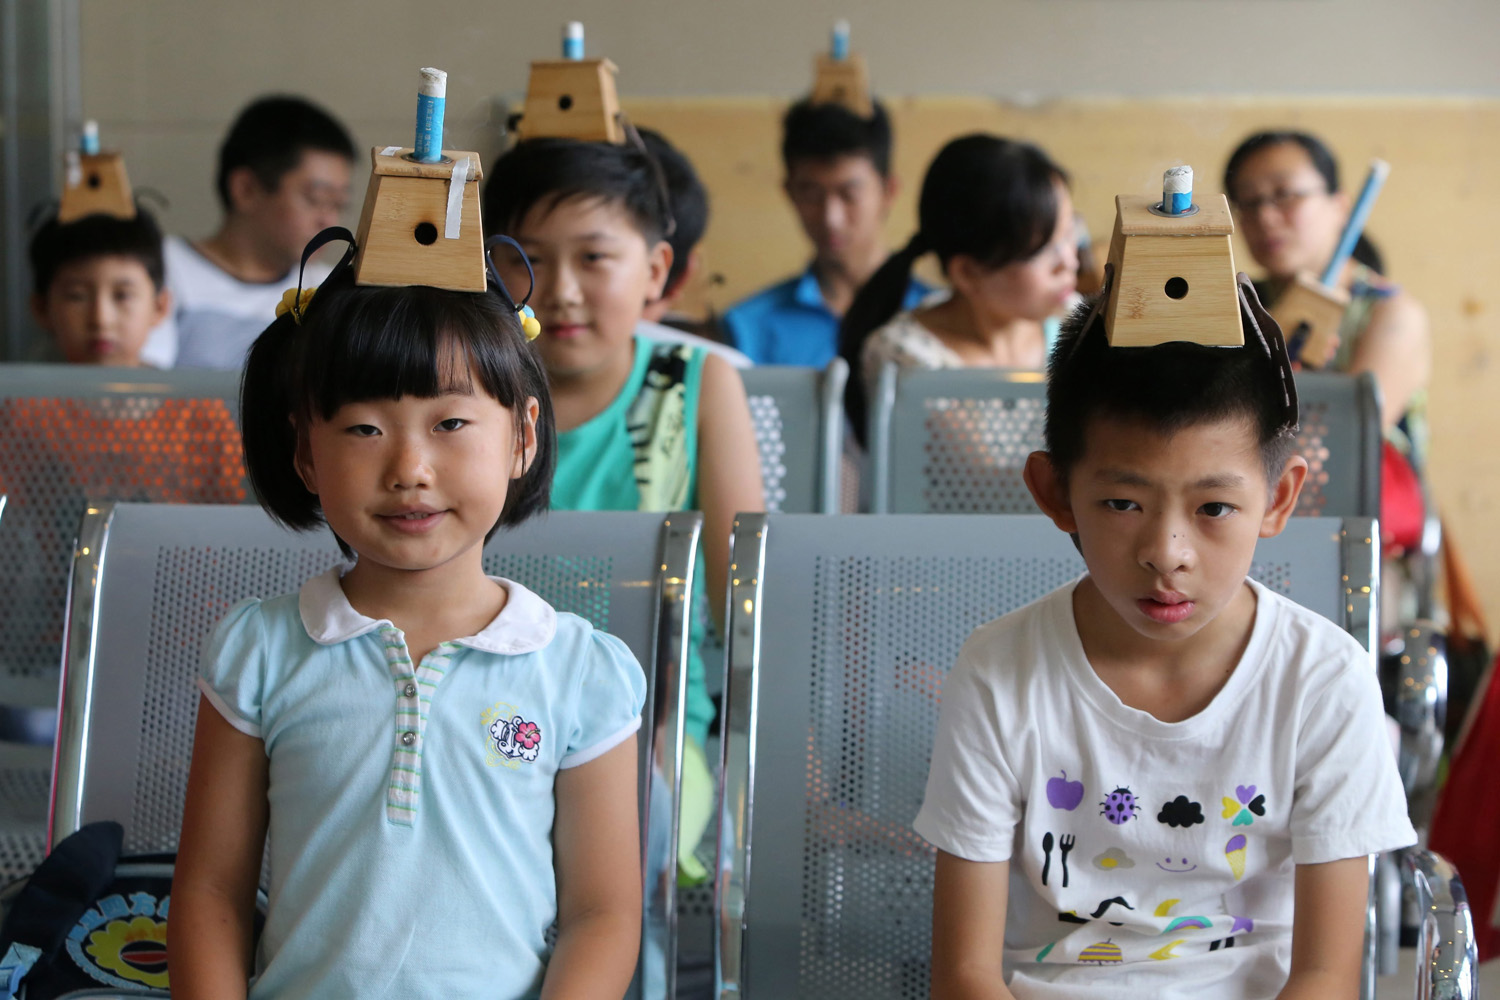 Children accept traditional Chinese medical treatment with moxibustion boxes on their heads in a hospital in Qingdao city, China on July 18, 2014.